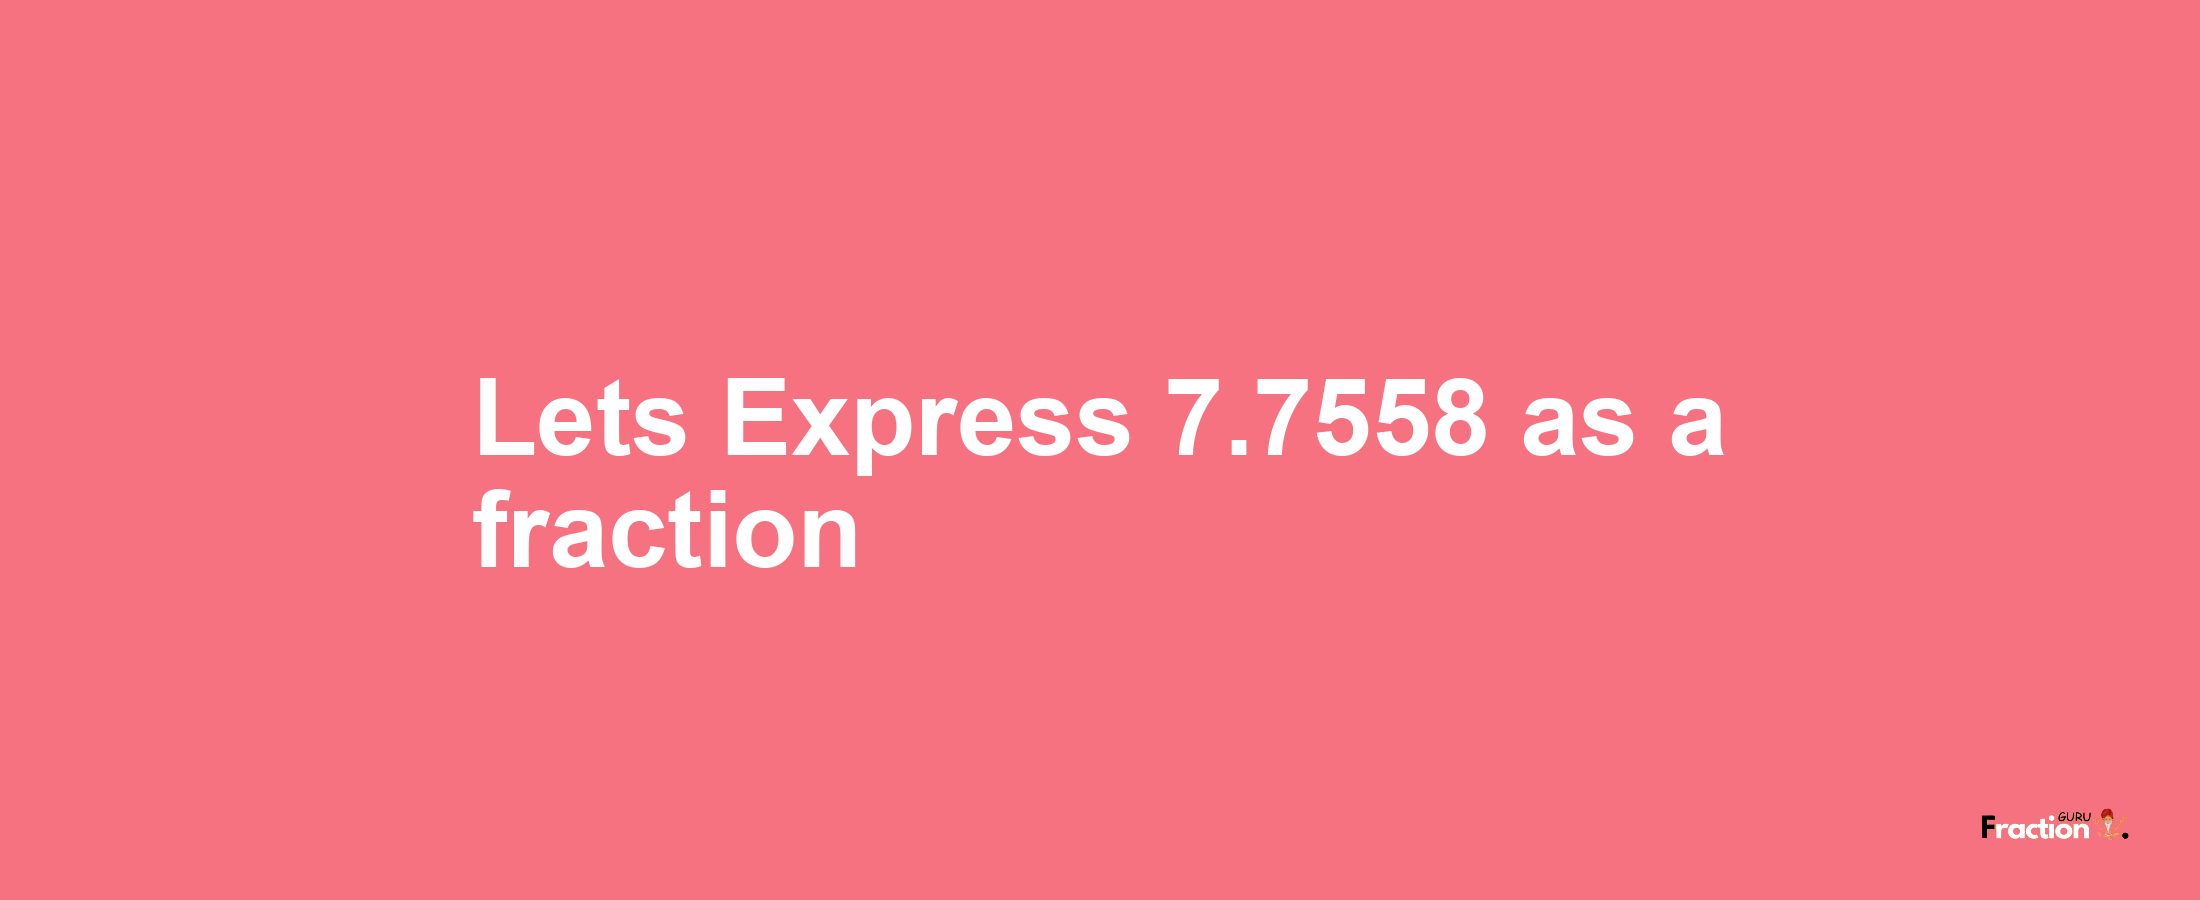 Lets Express 7.7558 as afraction